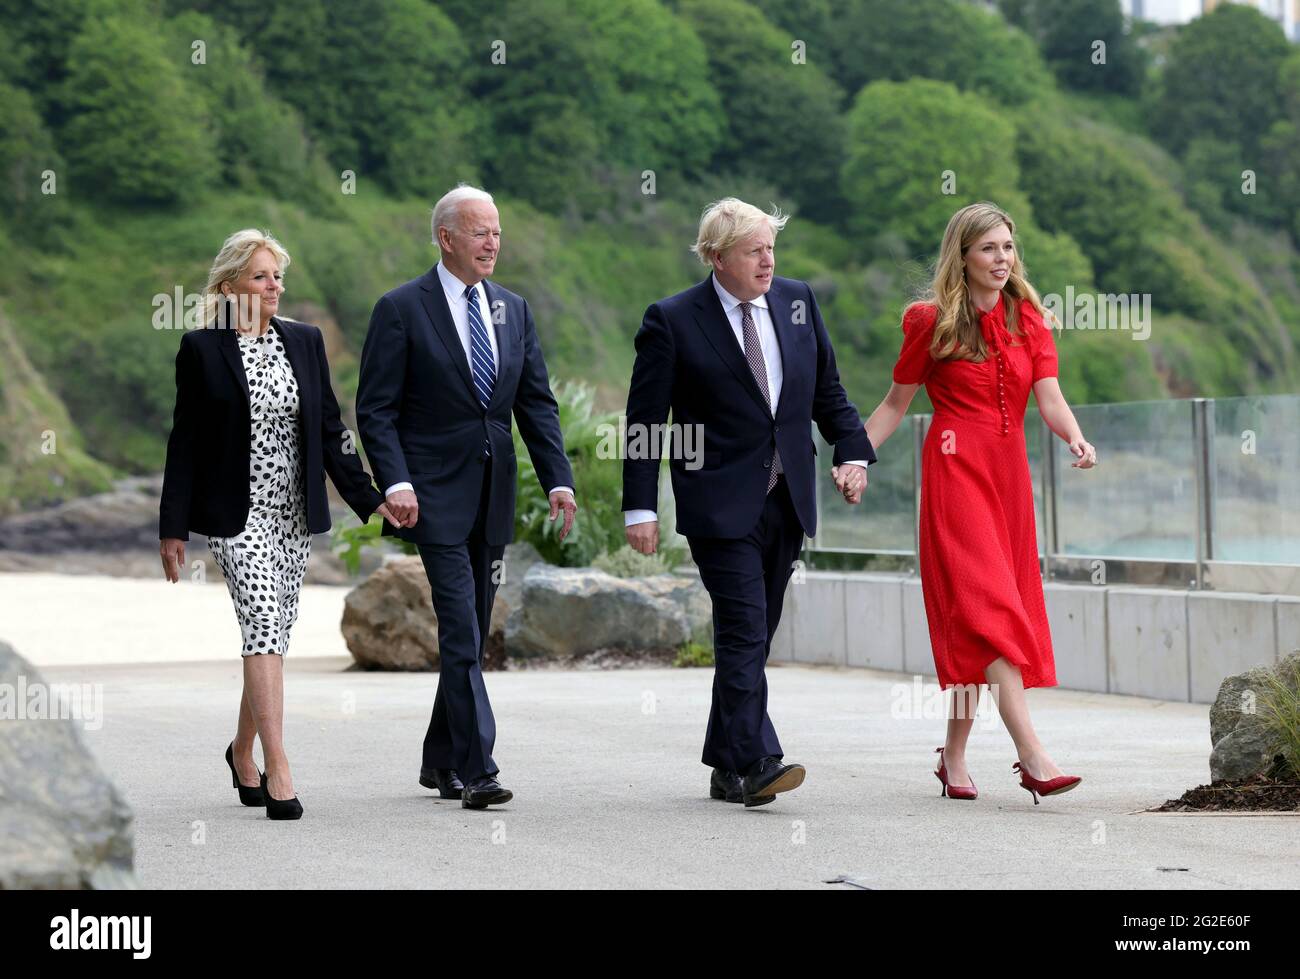 (210610) -- FALMOUTH (BRITAIN), June 10, 2021 (Xinhua) -- British Prime Minister Boris Johnson (2nd R) and his wife Carrie Symonds (1st R) walk with U.S. President Joe Biden (2nd L) and his wife Jill Biden (1st L) in Carbis Bay, Cornwall, Britain, on June 10, 2021. Boris Johnson and Joe Biden on Thursday agreed to work to resume travel between the two countries and signed a new Atlantic Charter, as they met ahead of the Group of Seven (G7) summit. (Andrew Parsons/No 10 Downing Street/Handout via Xinhua) Credit: Xinhua/Alamy Live News Stock Photo